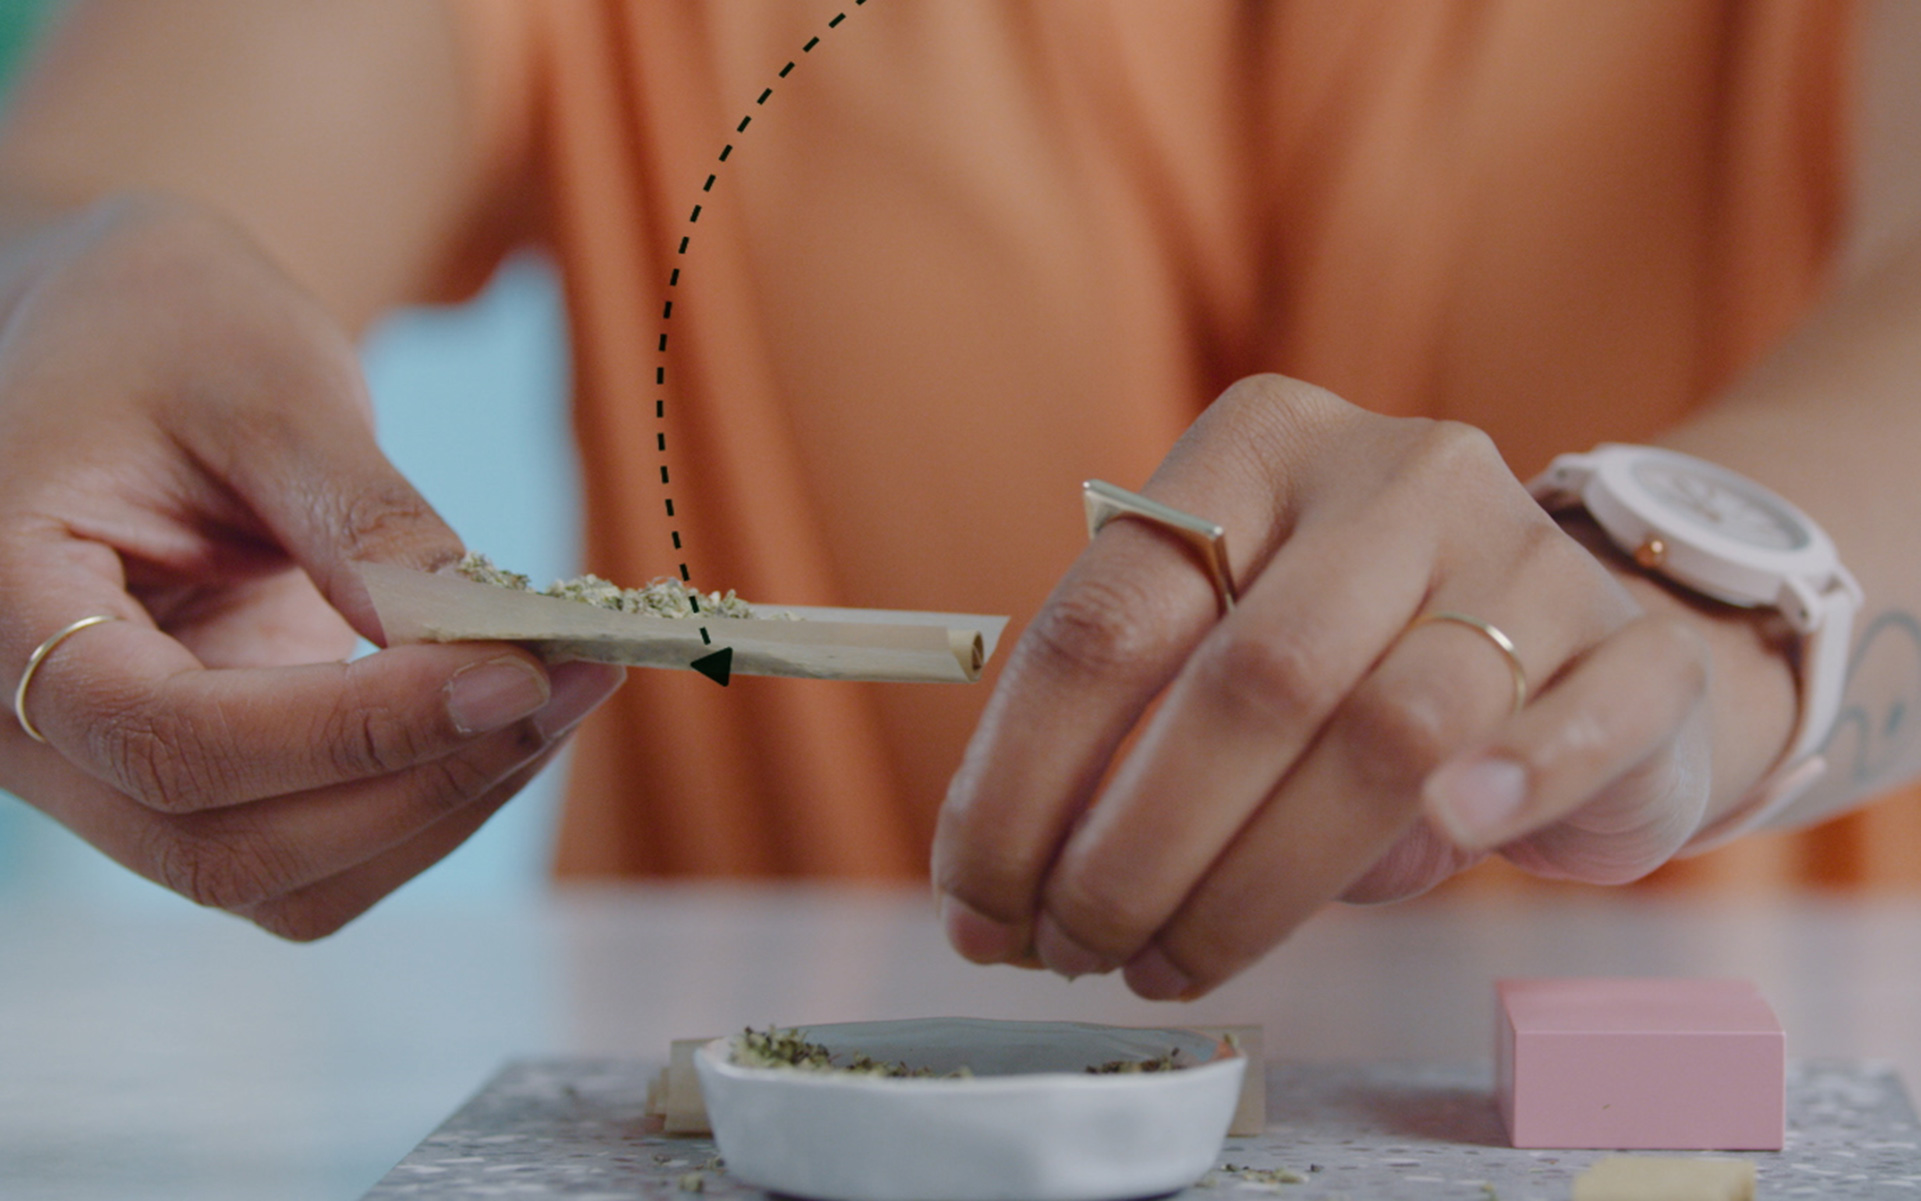 How To Roll A Joint With Bible Paper